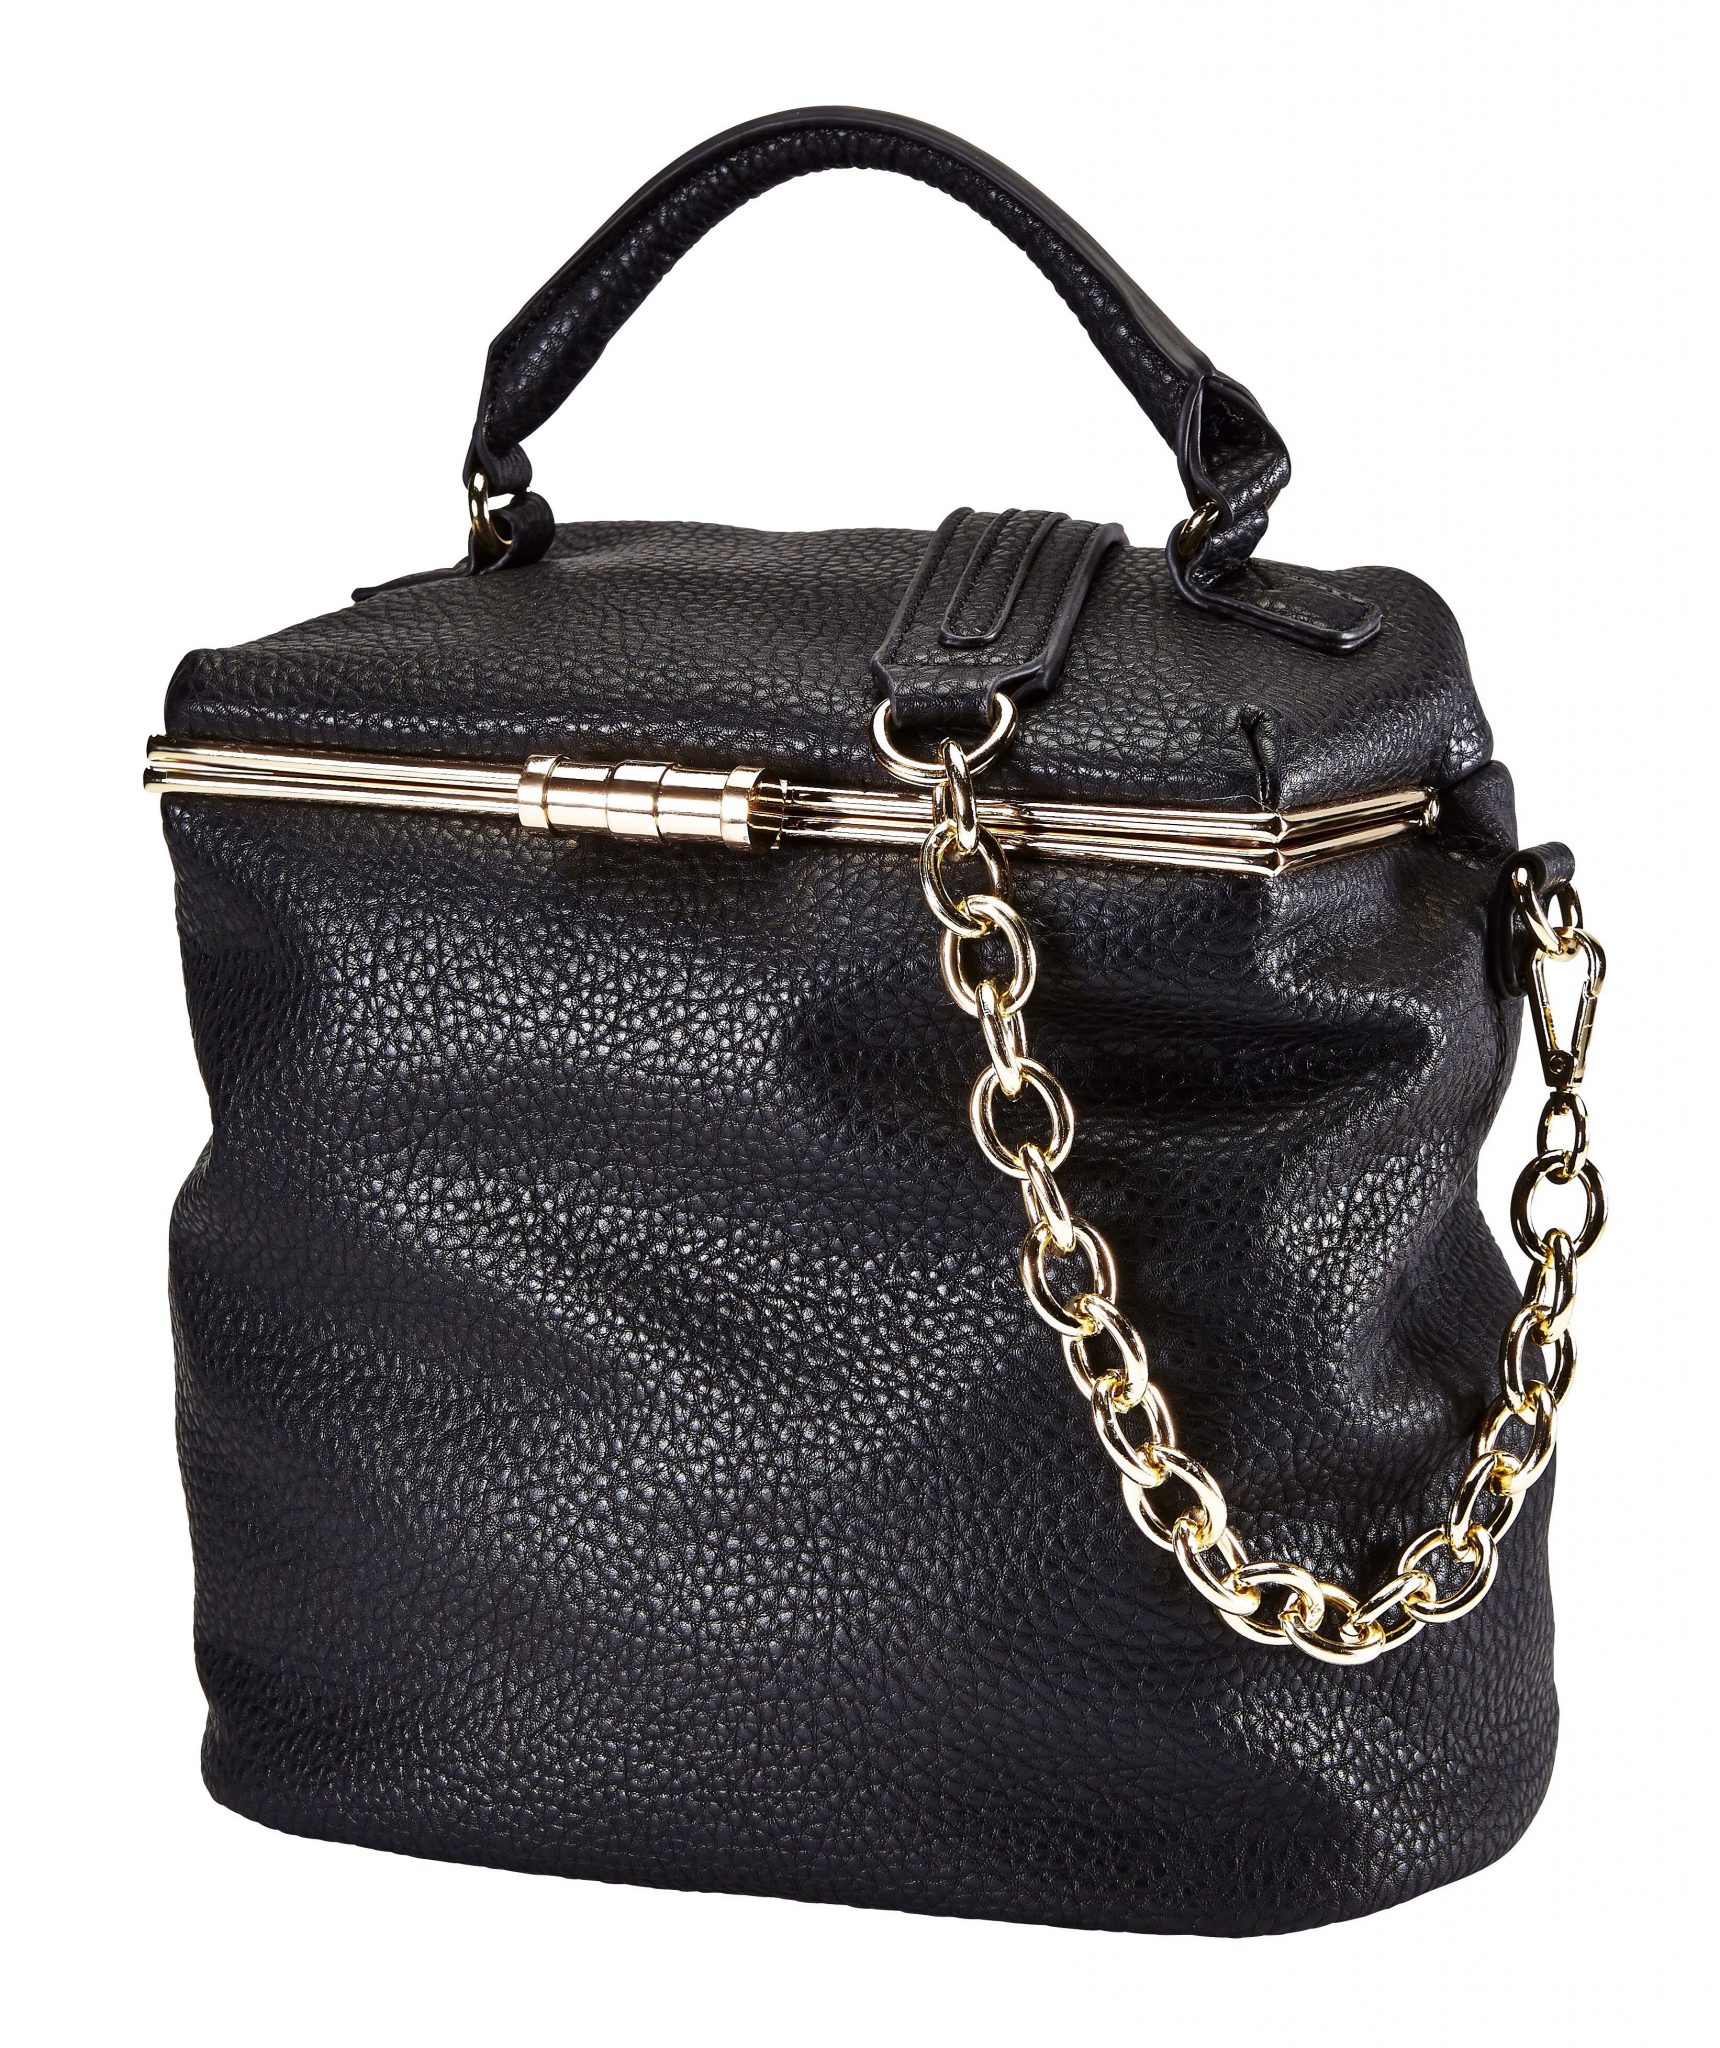 Faux Leather Top Handle Bag  $39.99  Compare at $75 